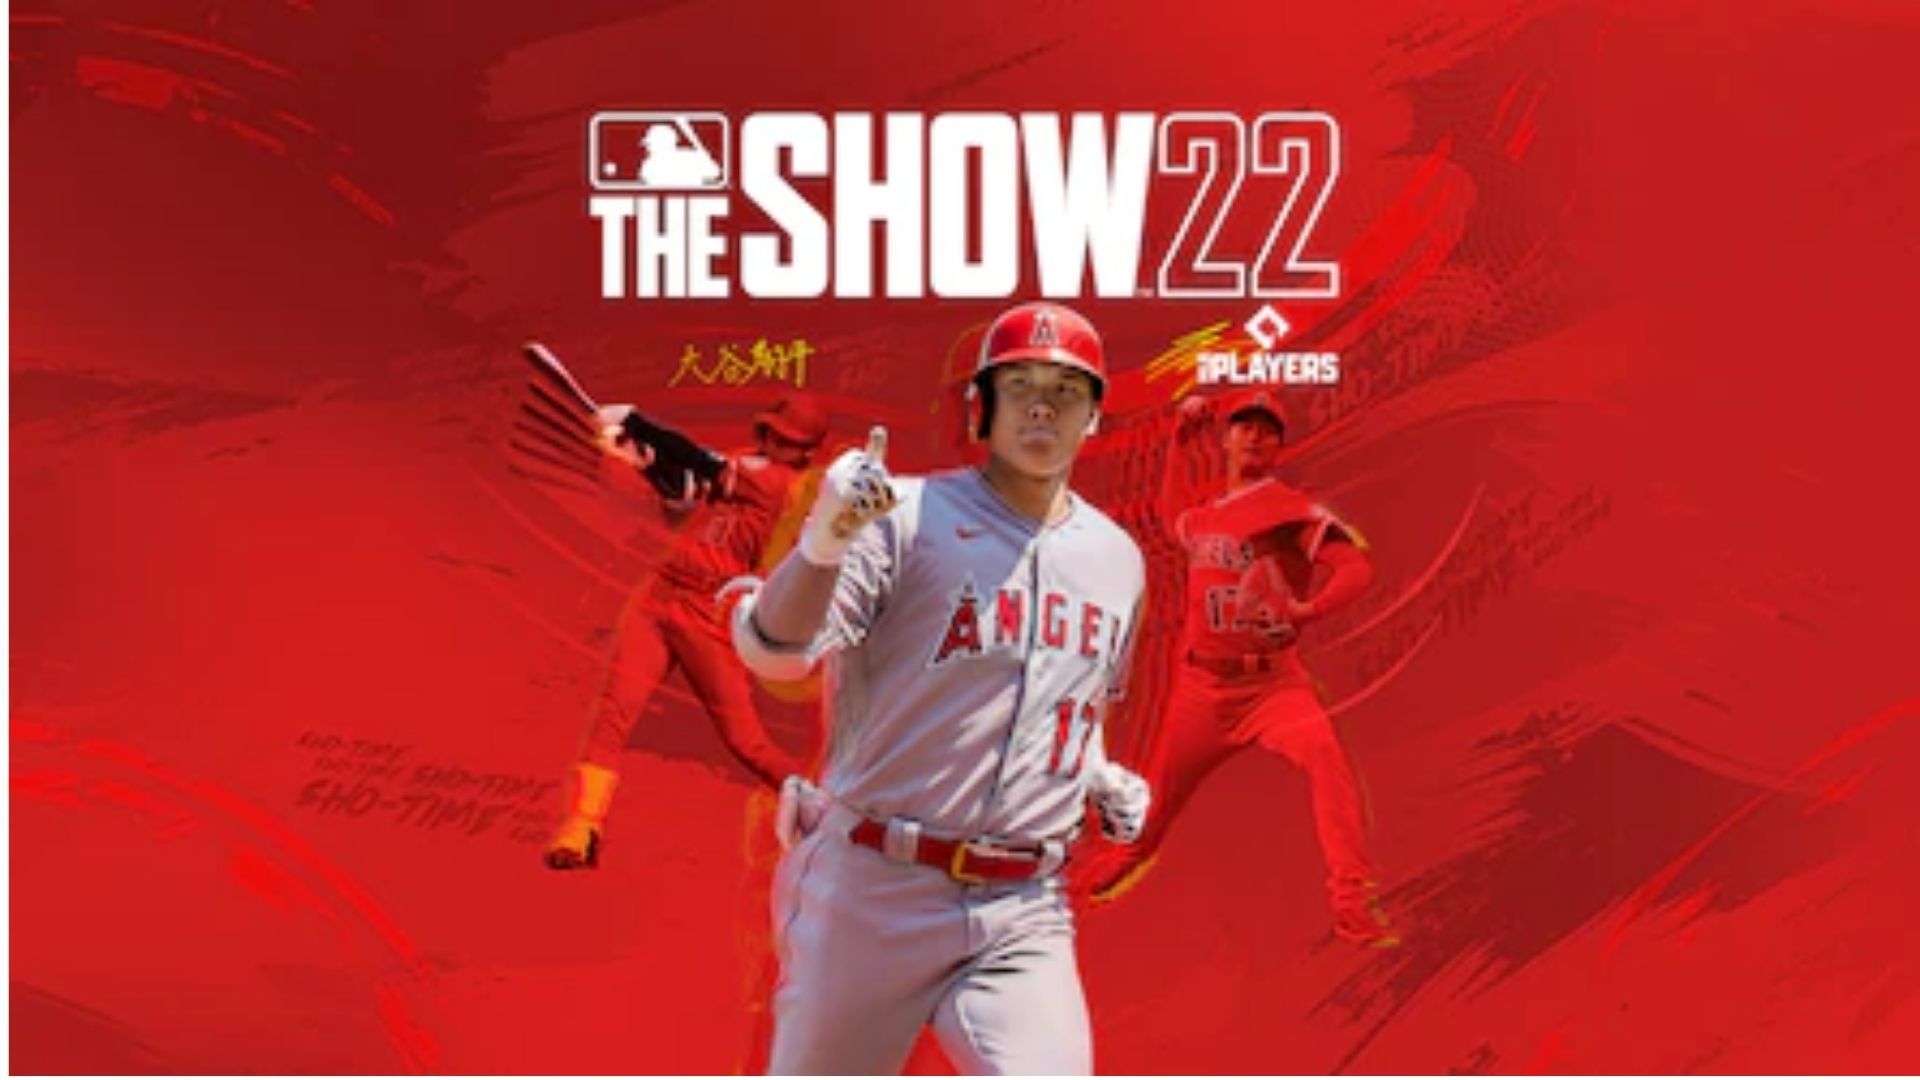 Video games coming in April: MLB The Show